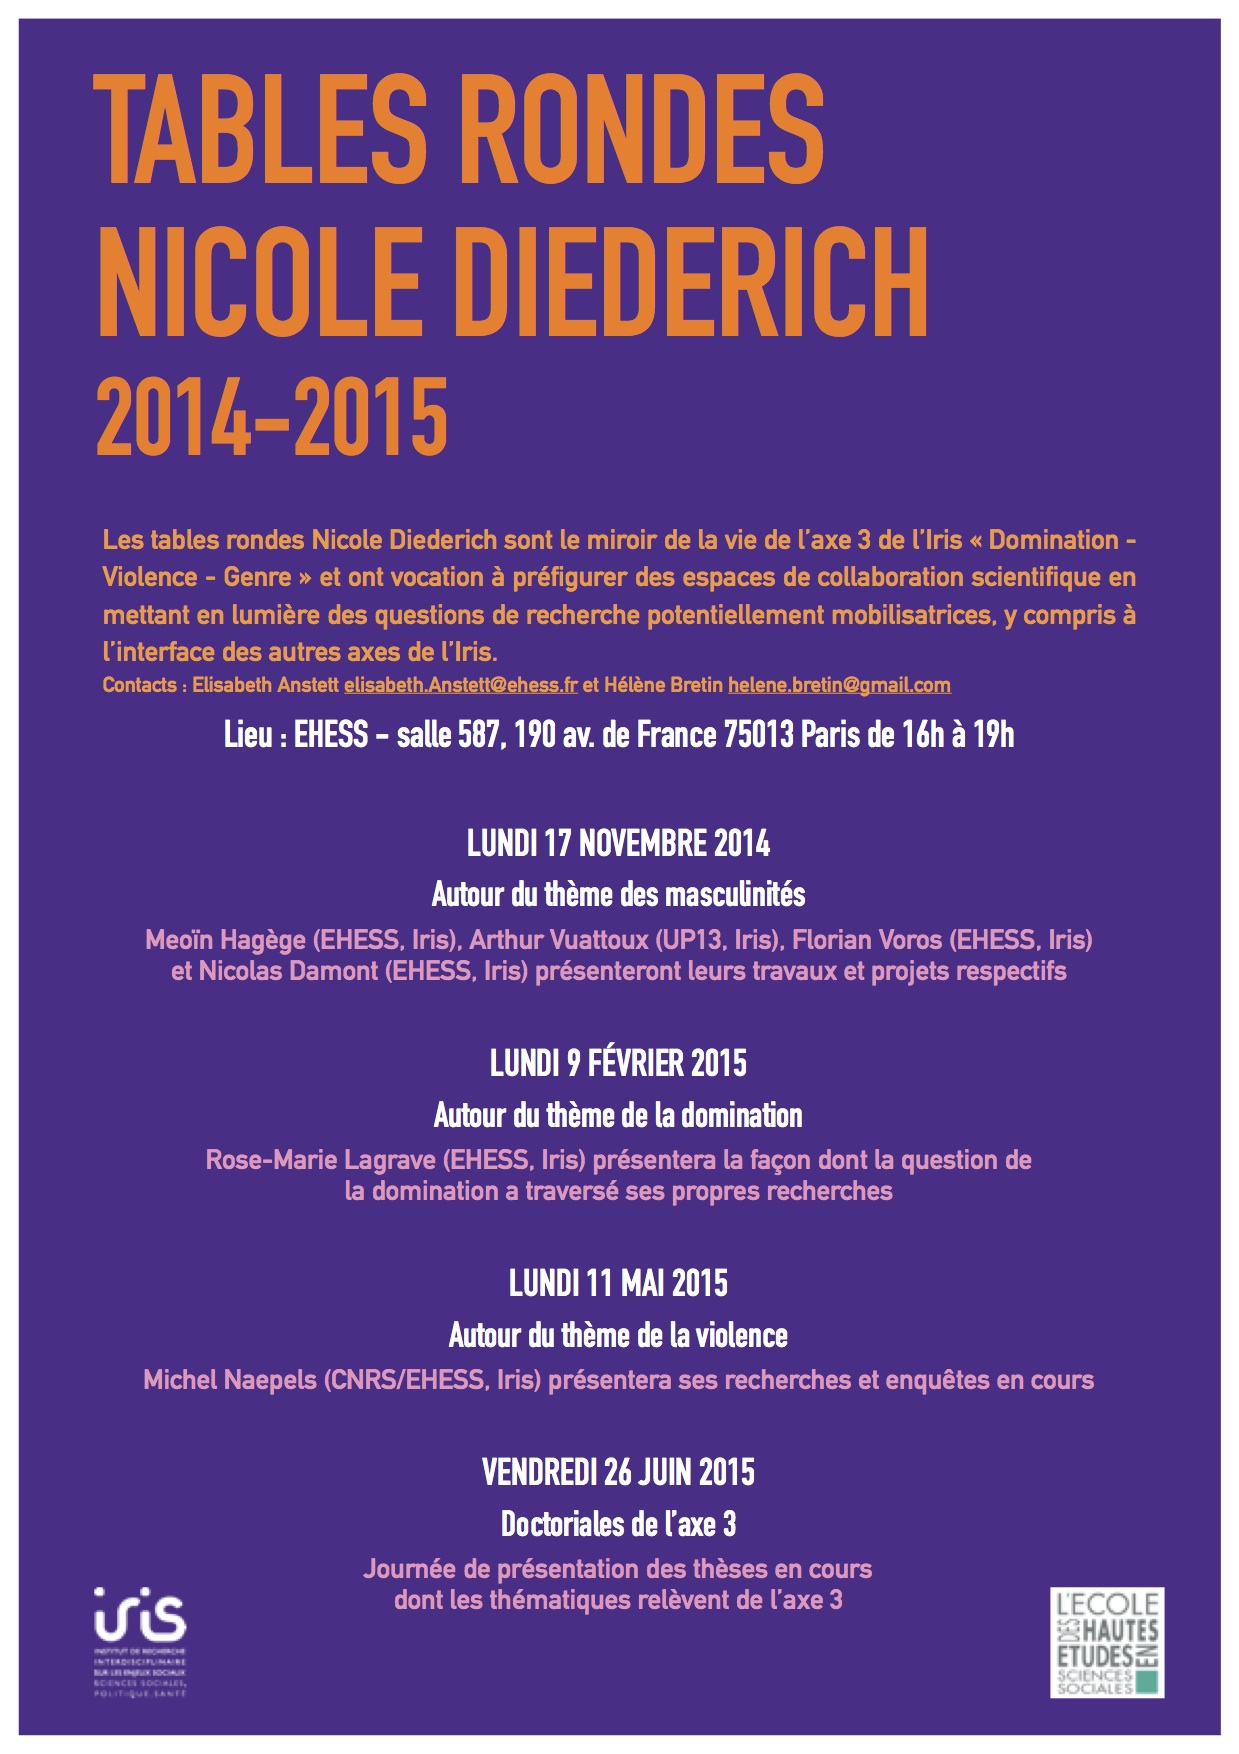 Axe 3 > Tables rondes Nicole Diederich - Programme 2014-2015